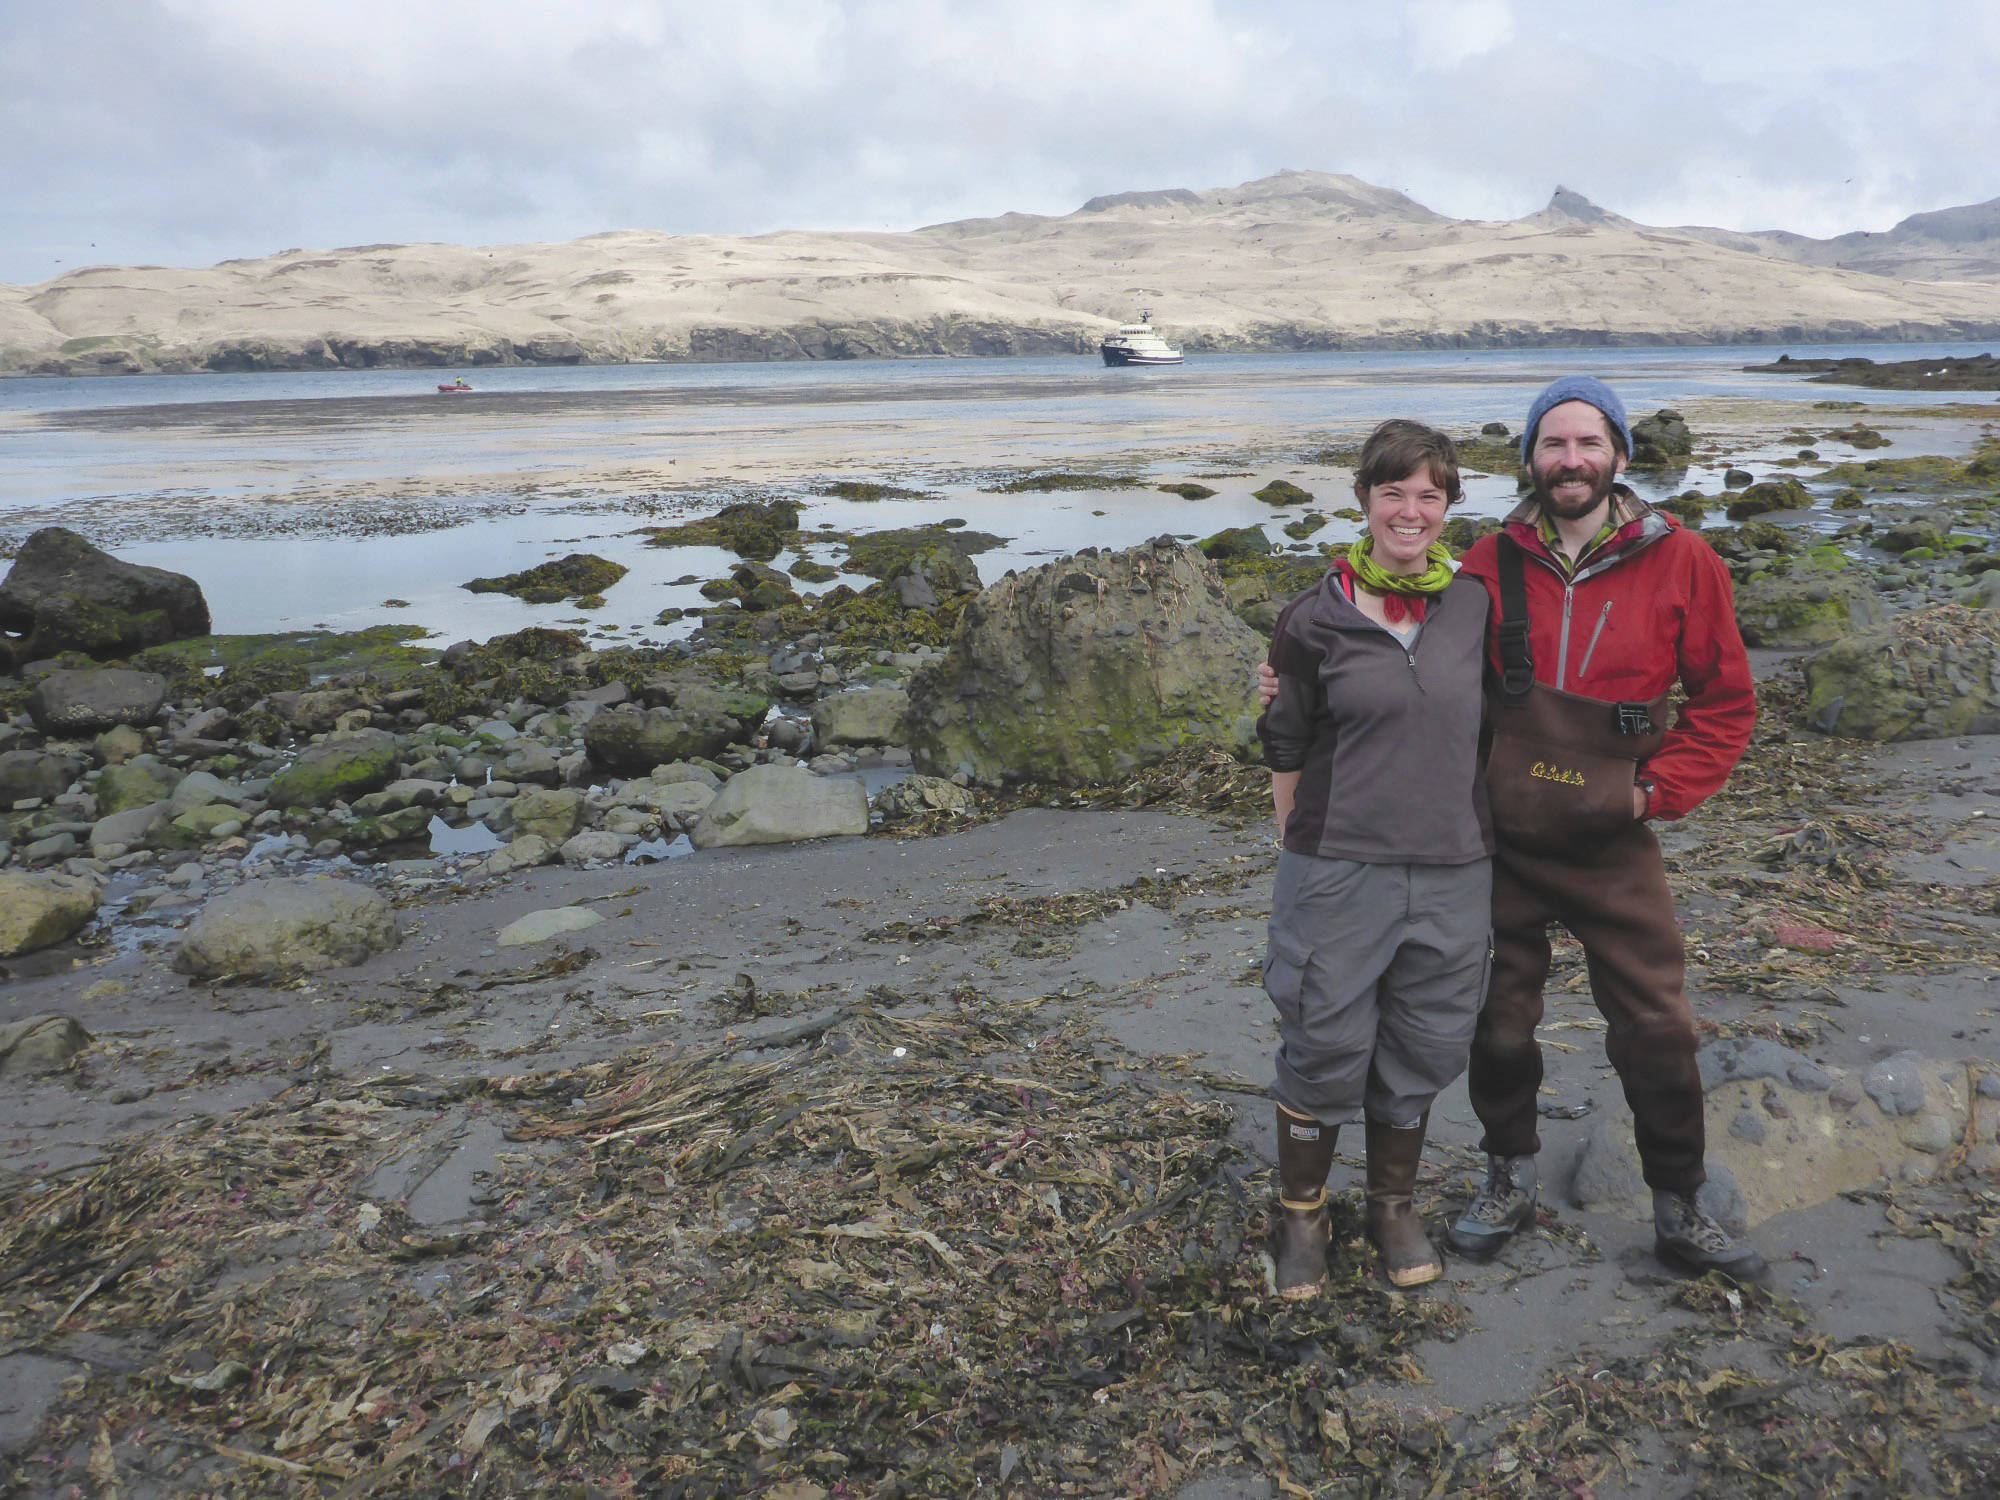 Dan Rapp and Sarah Youngren of Soldotna have spent the last five summers on Aiktak Island in the eastern Aleutians and hope to return in 2020. (Photo by Sarah Youngren)